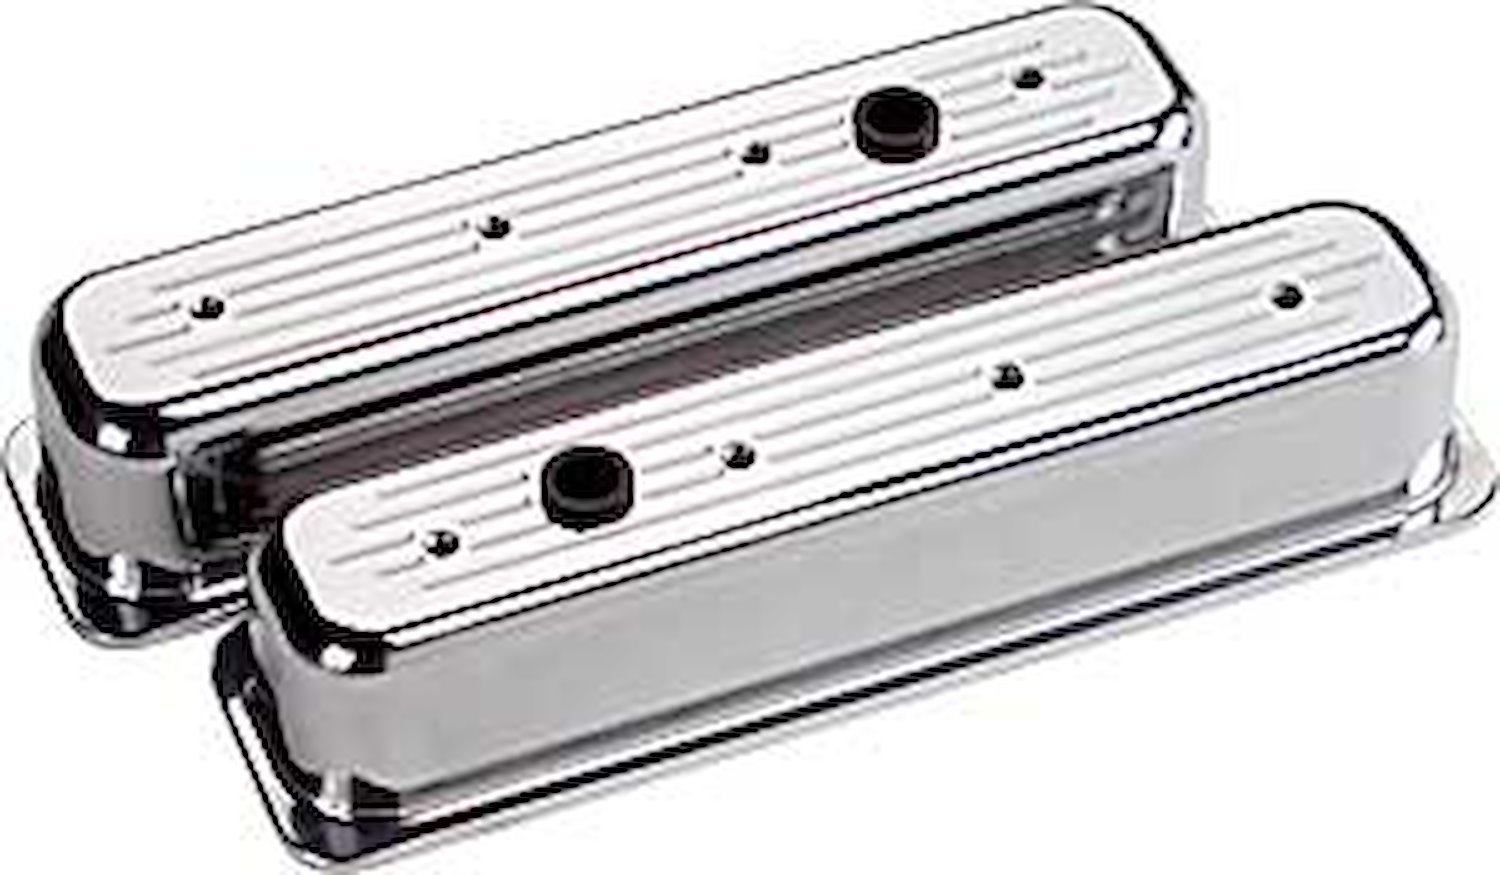 Small Block Chevy Center-Bolt Valve Covers